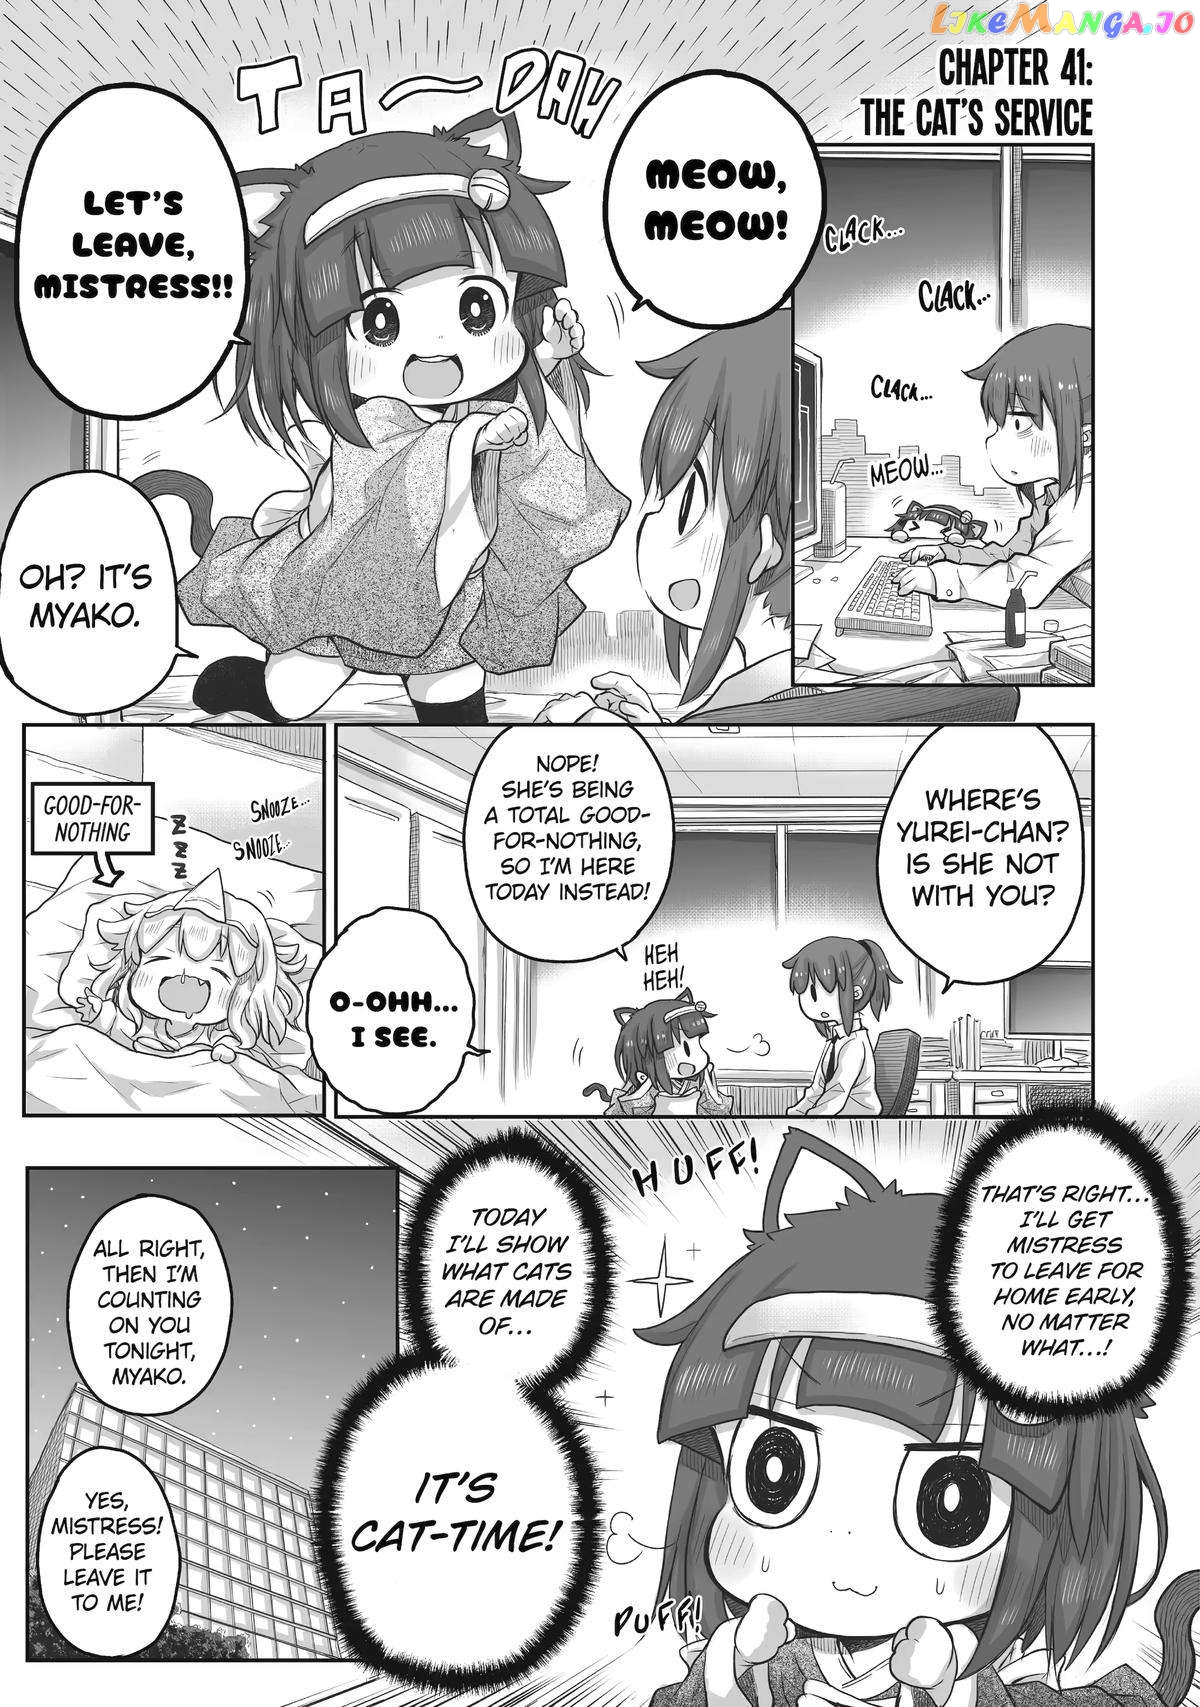 Ms. Corporate Slave Wants to be Healed by a Loli Spirit - chapter 41 - #1